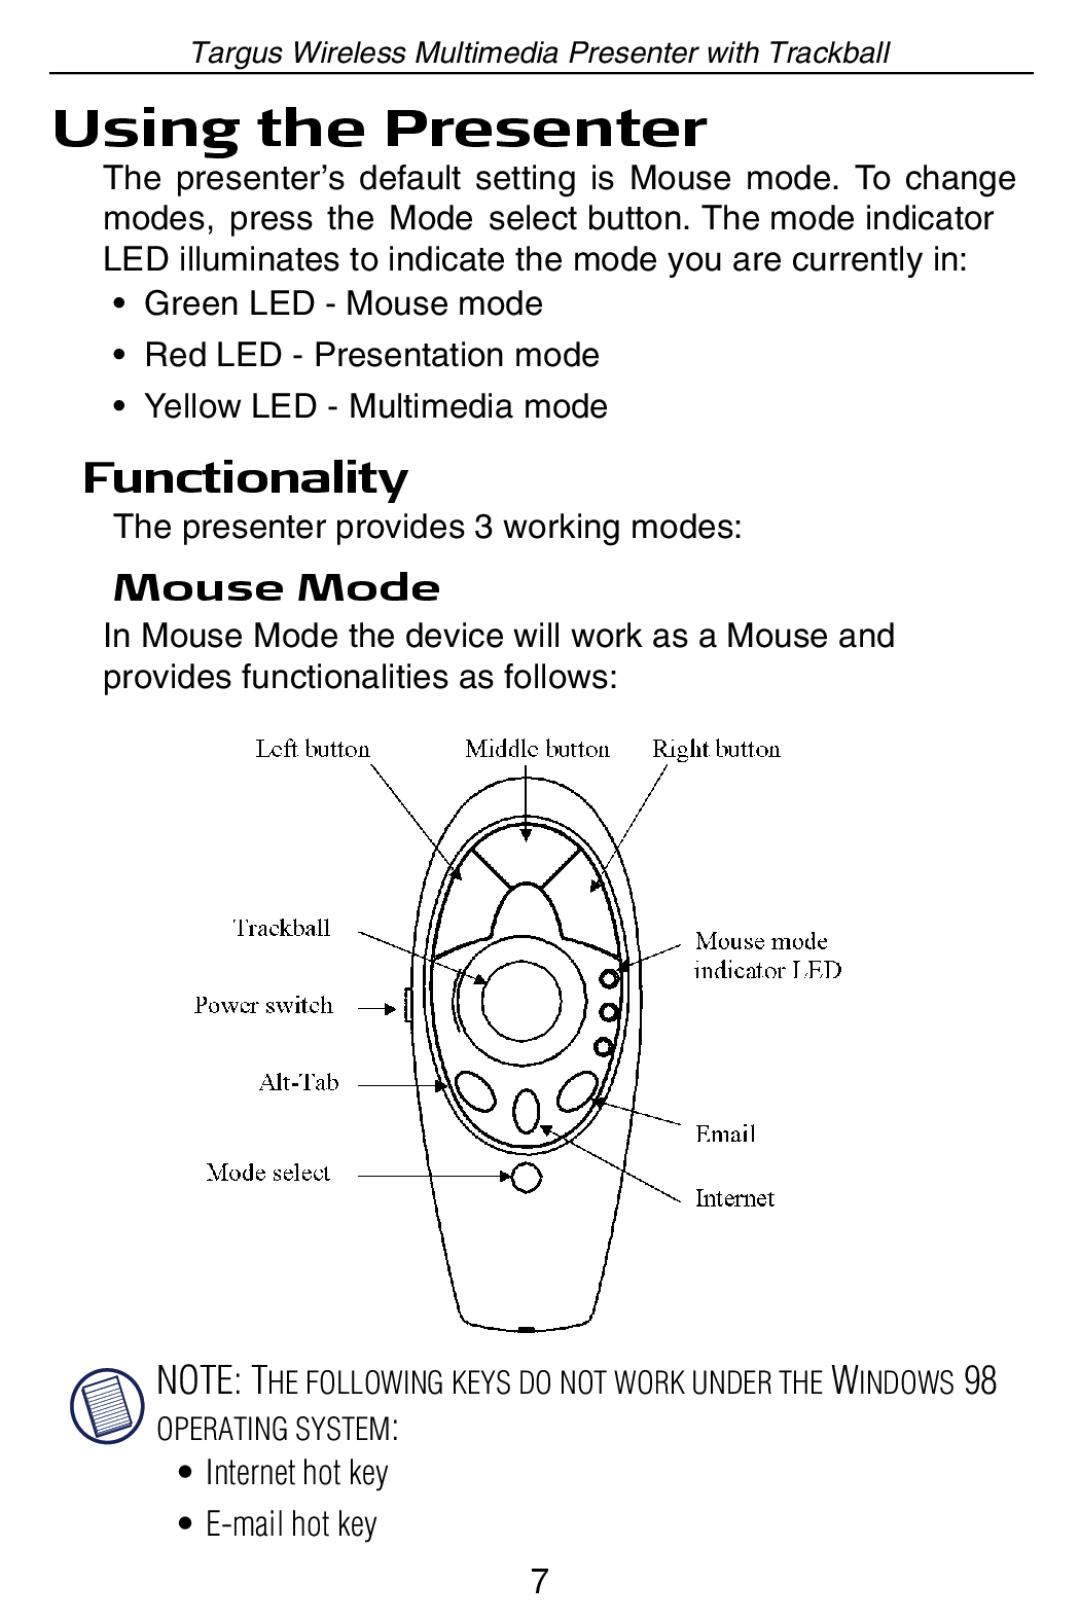 Targus Wireless Multimedia Presenter with Trackball manual Using the Presenter, Functionality, Mouse Mode 